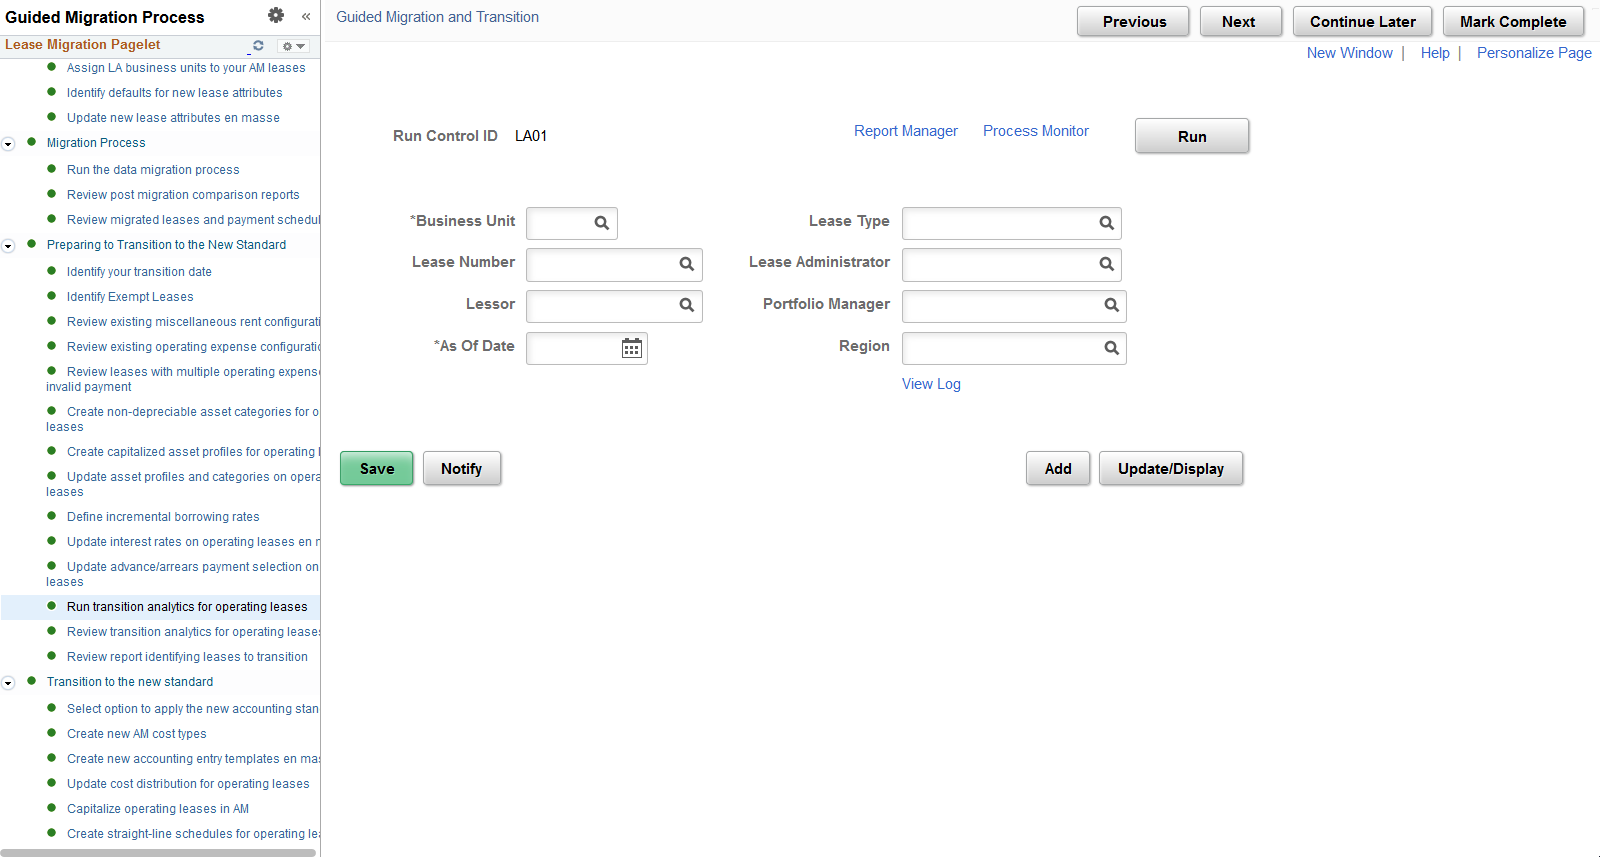 Run Transition Analytics for Operating Leases page